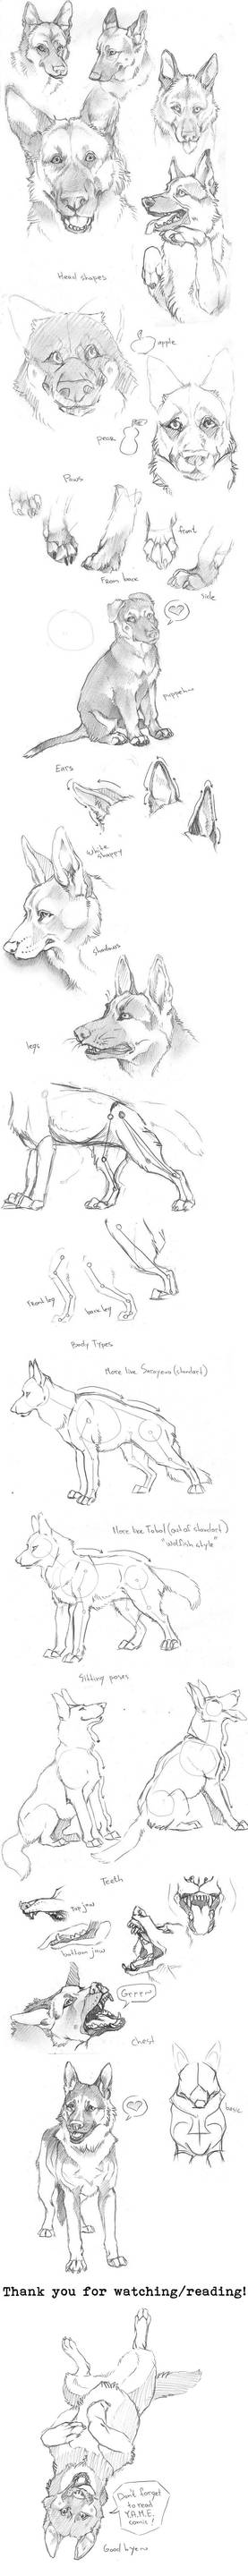 GSD tutorial and sketches